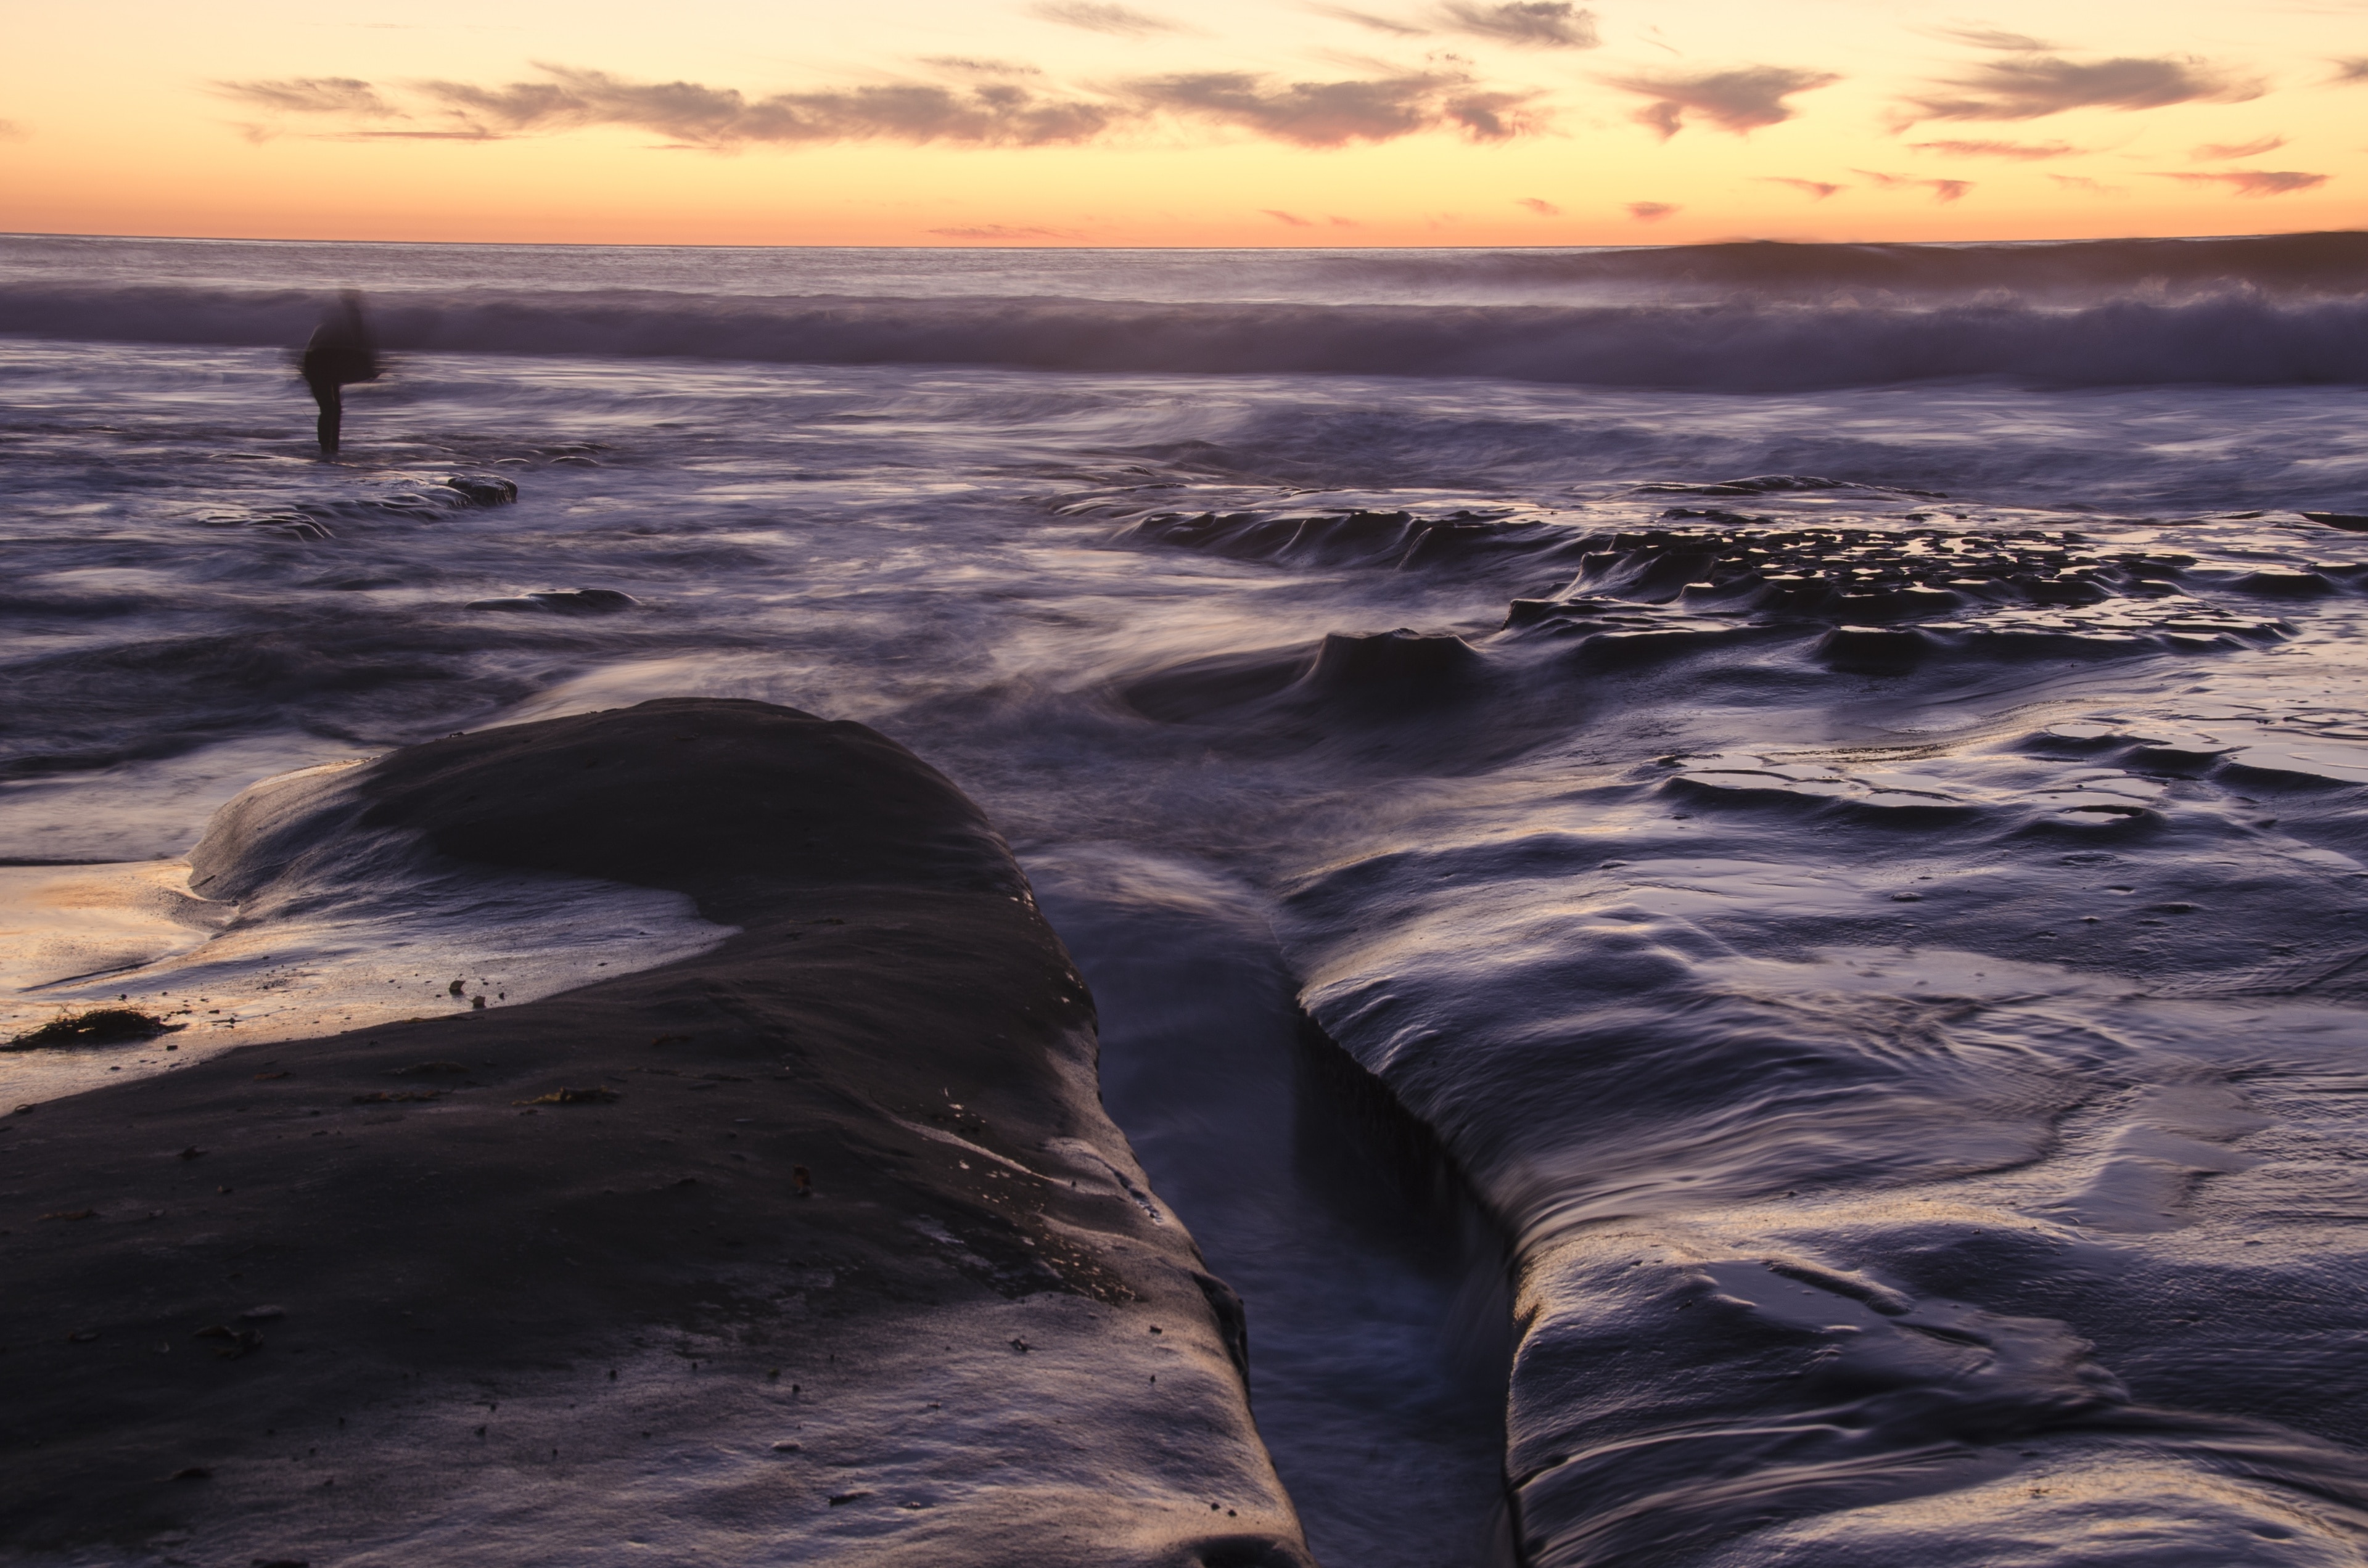 As the sun goes down in La Jolla, the water flows into the rocky areas, covering up most of the tide pools.  When photographing this scenery, a person walked on the tide pools, preparing to go into the water and surf.  One of the most interesting things that happened in this image is the way the river pours into the tide pools and then recedes back, repeating this over and over again, while people tend to walk over them, either to photograph or to swim.

#myBackyard #Trovember #LaJollaTidepools #LaJolla